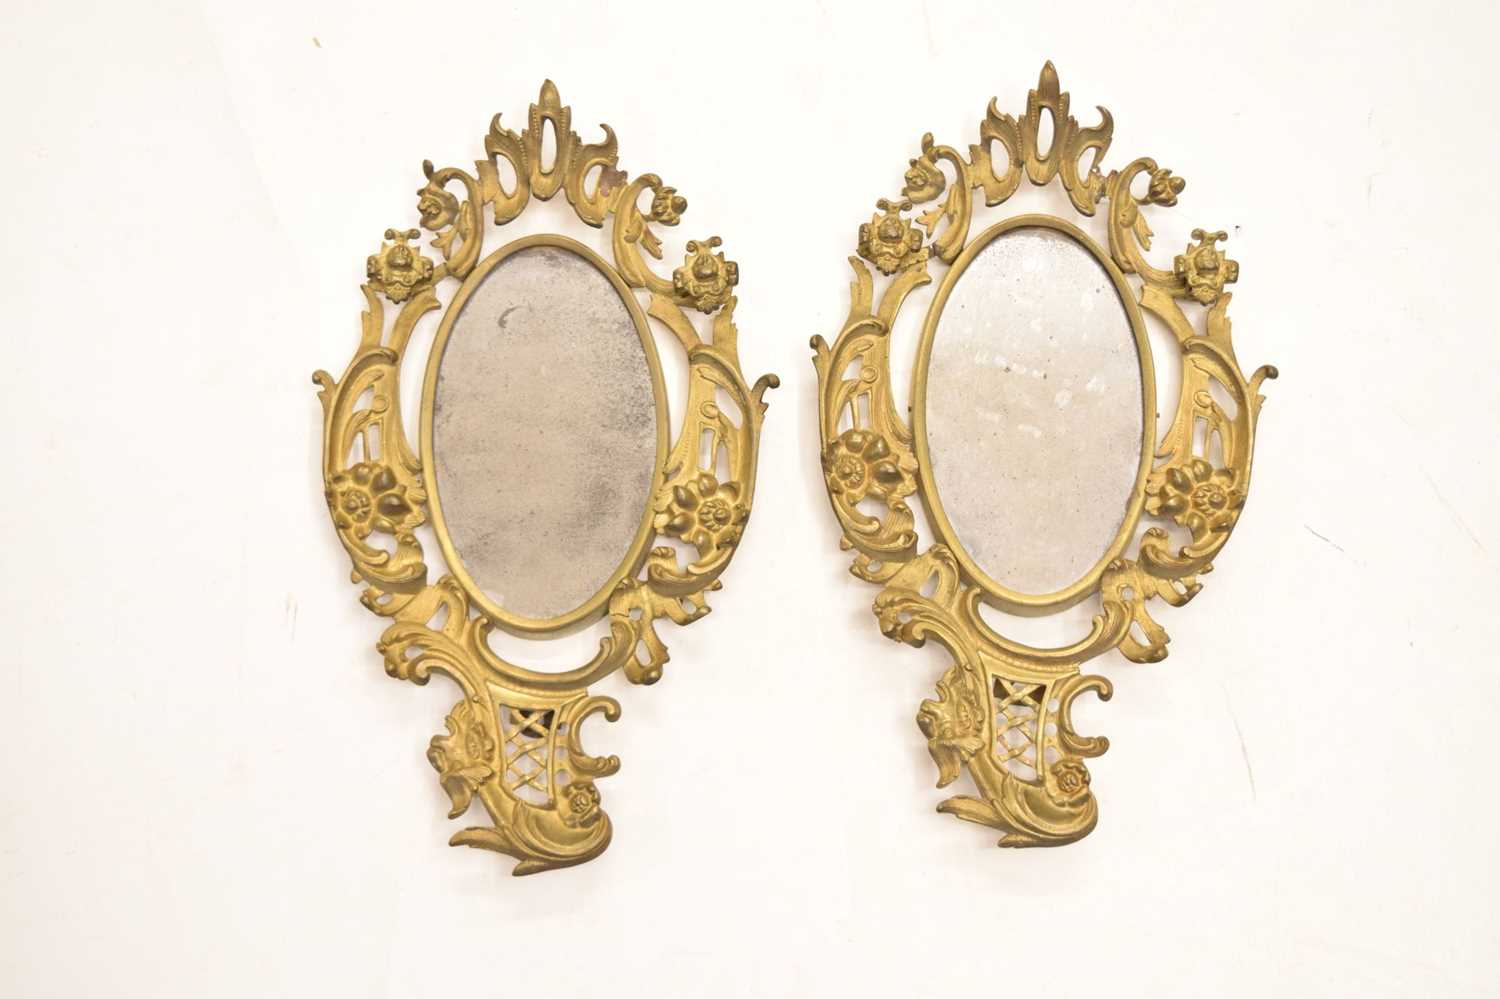 Pair of gilt metal wall mirrors - Image 2 of 8